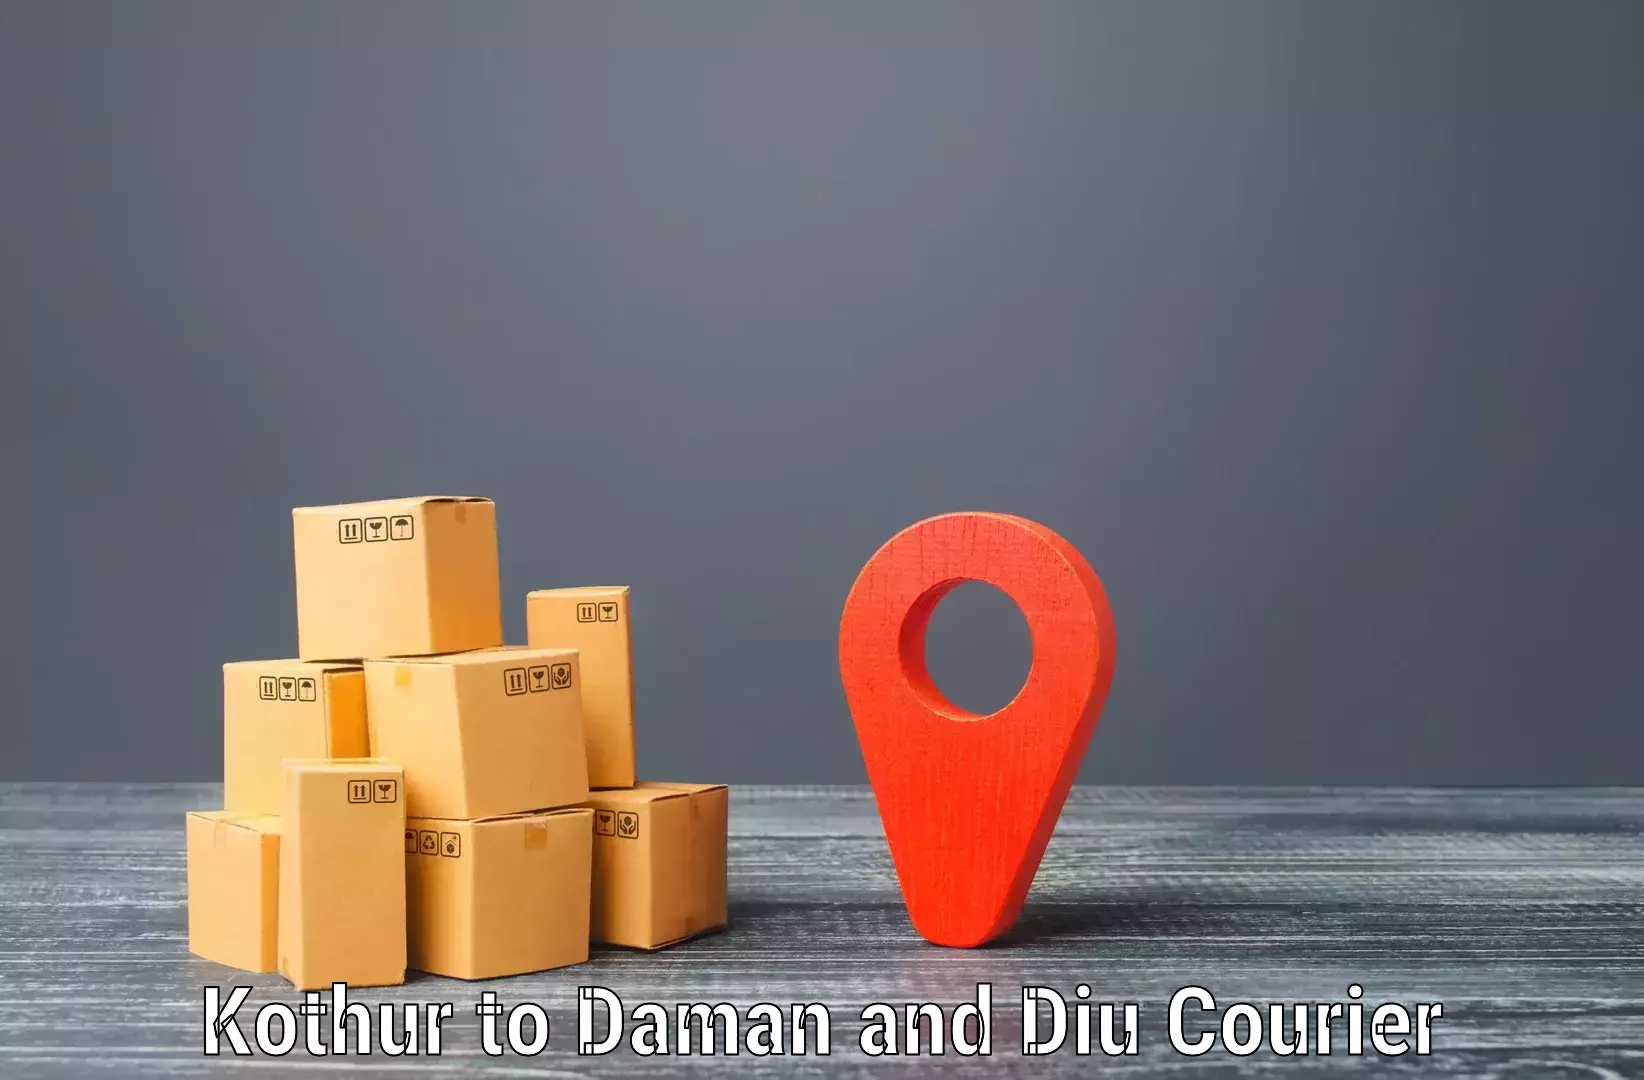 Sustainable shipping practices in Kothur to Diu